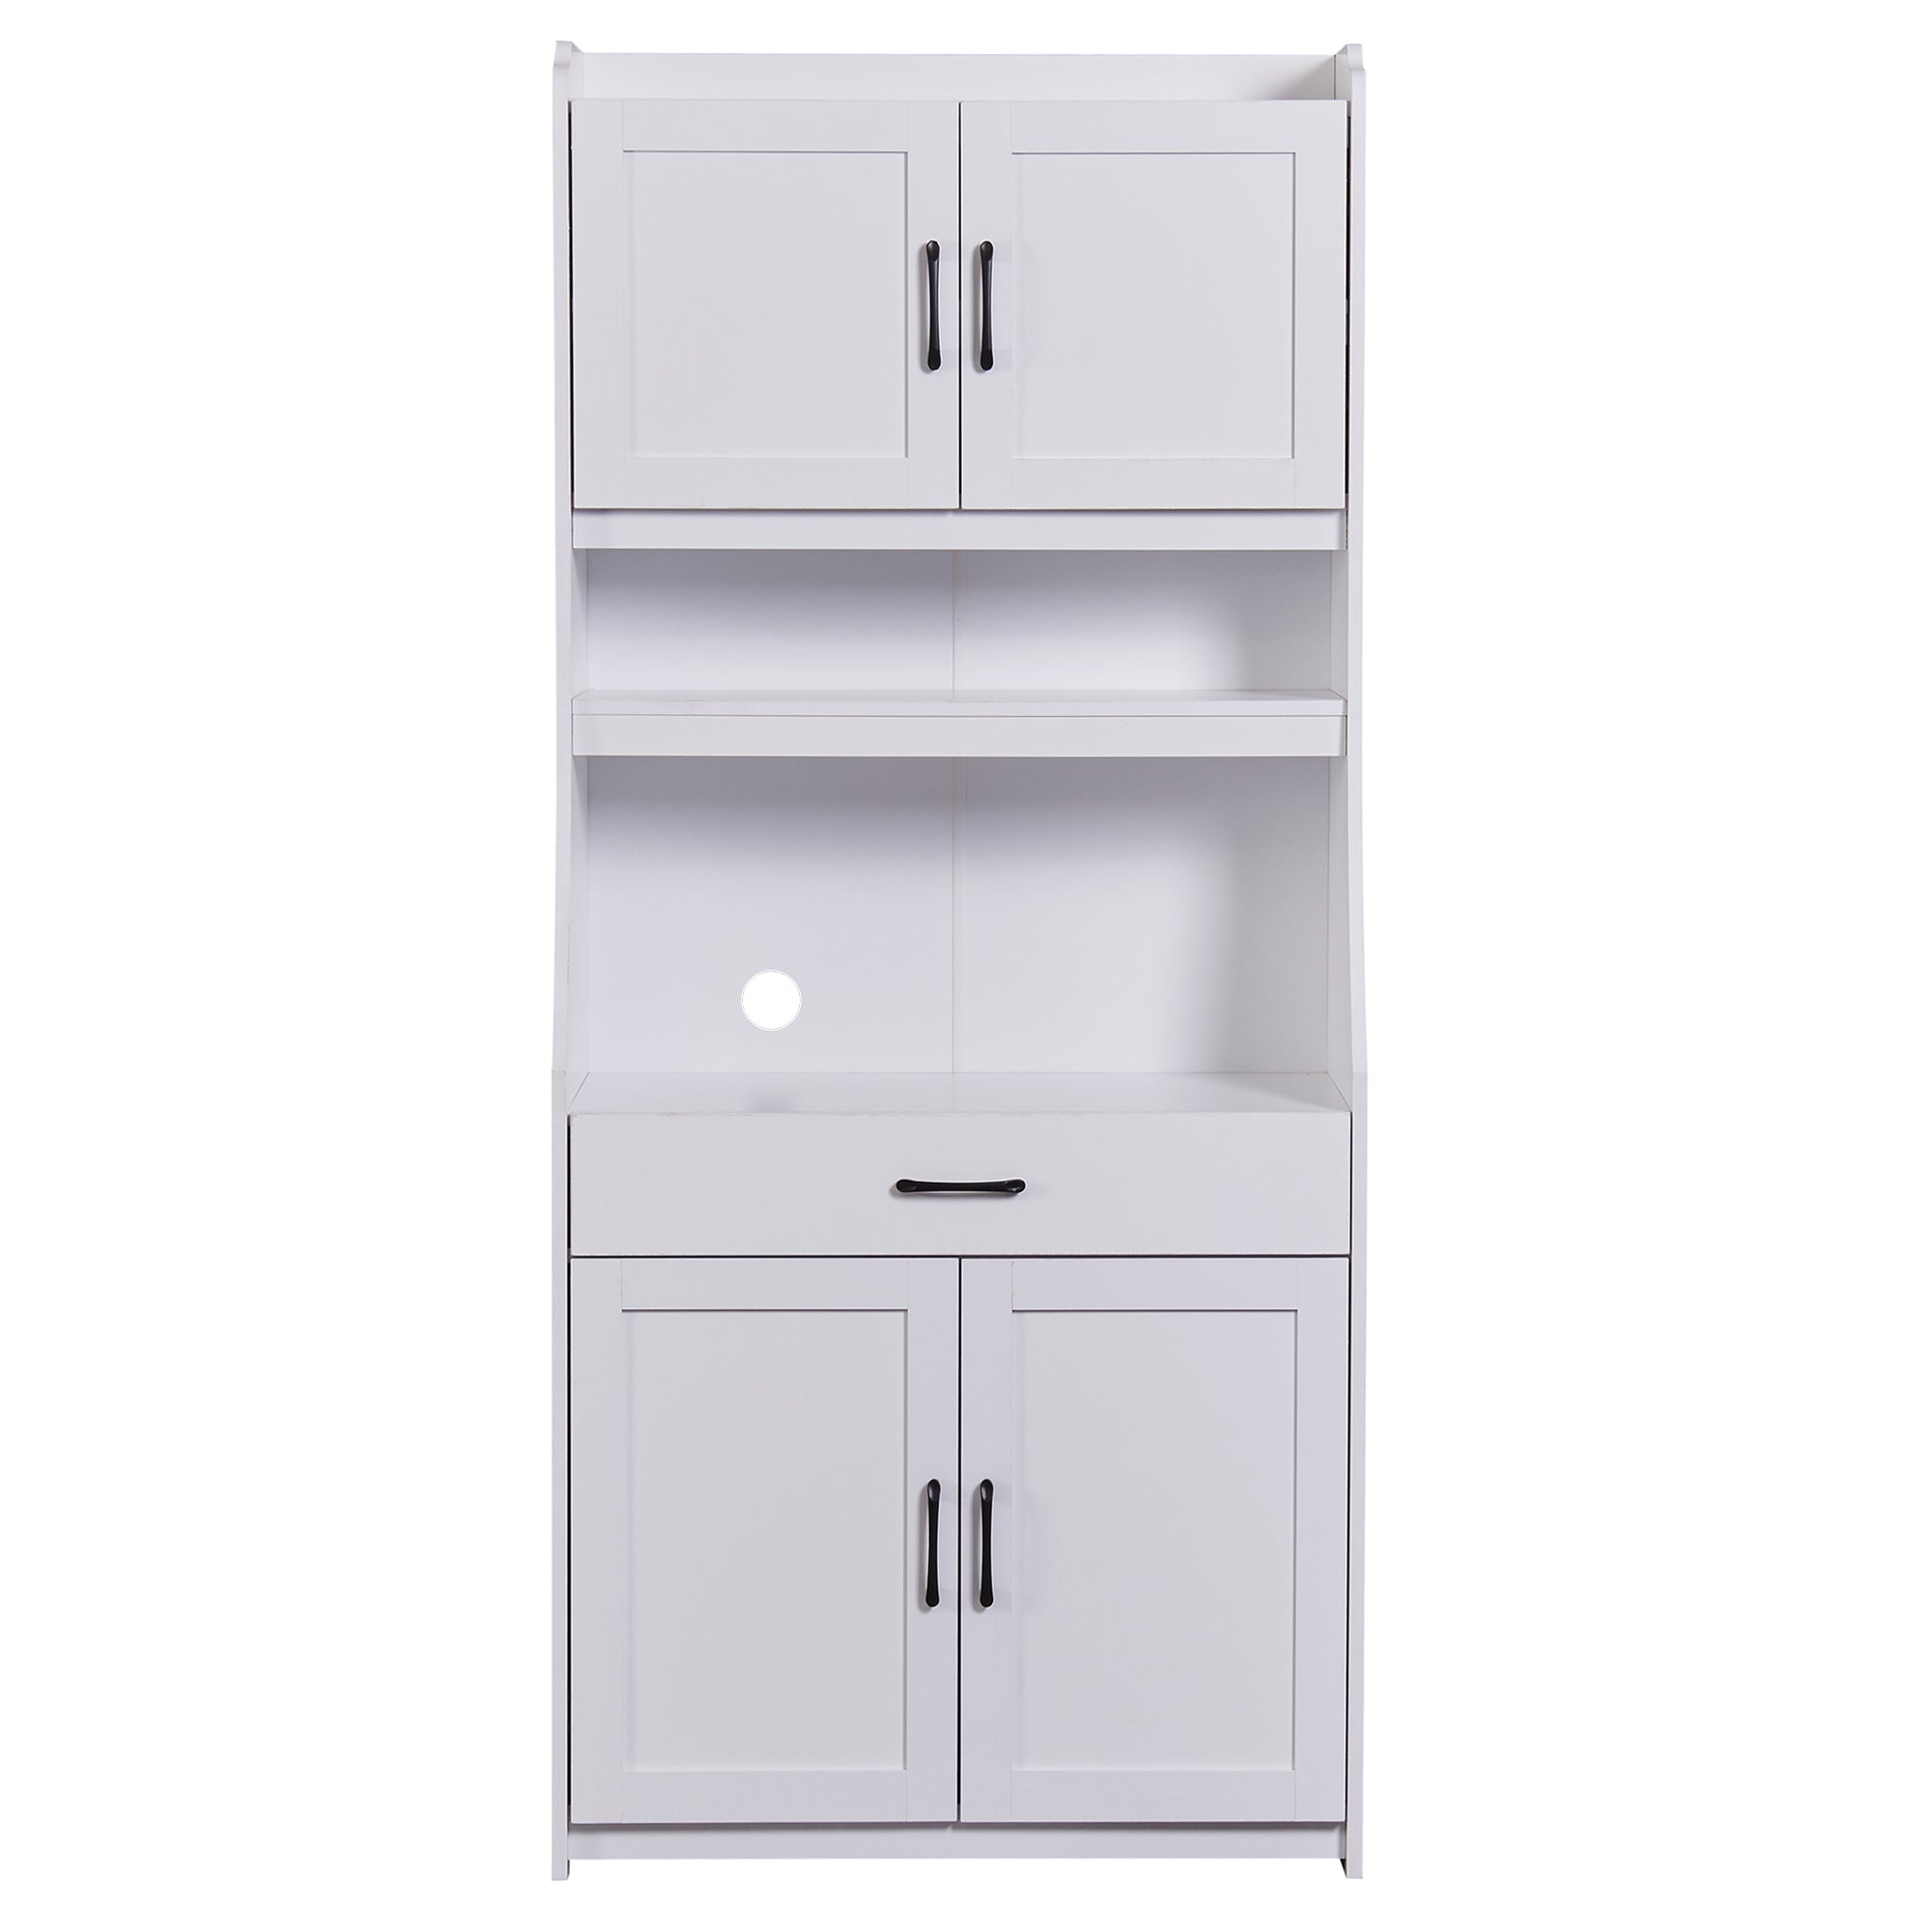 TREXM One-body Style Pantry Cabinet Kitchen Living Room Dining Room Storage Buffet with Doors, Adjustable Shelves (White)